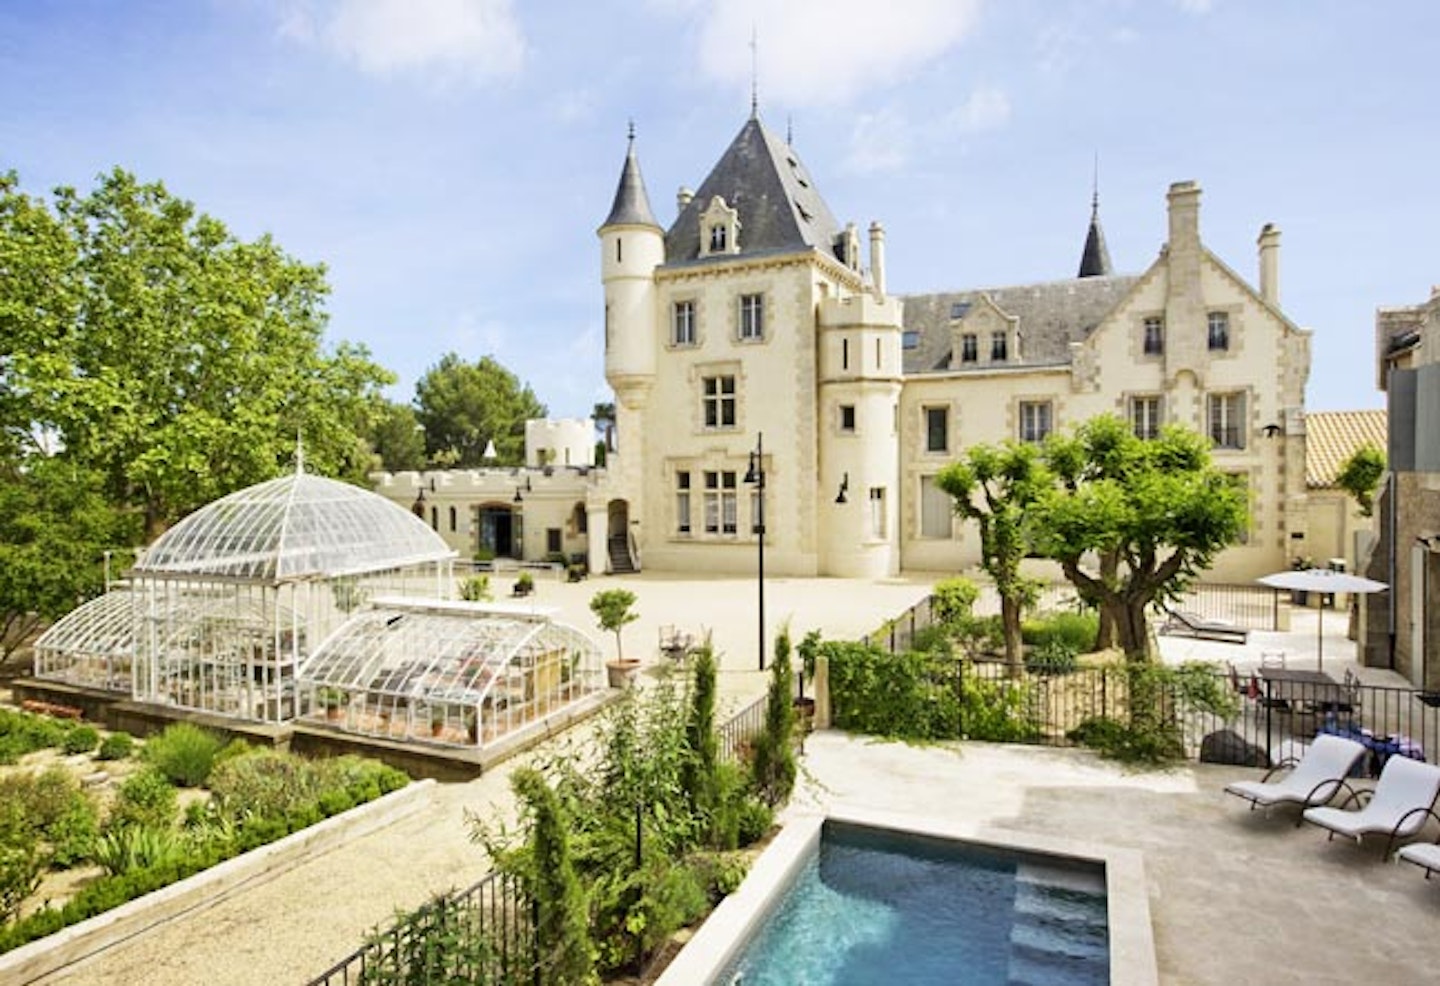 Chateau Les Carrasses in France